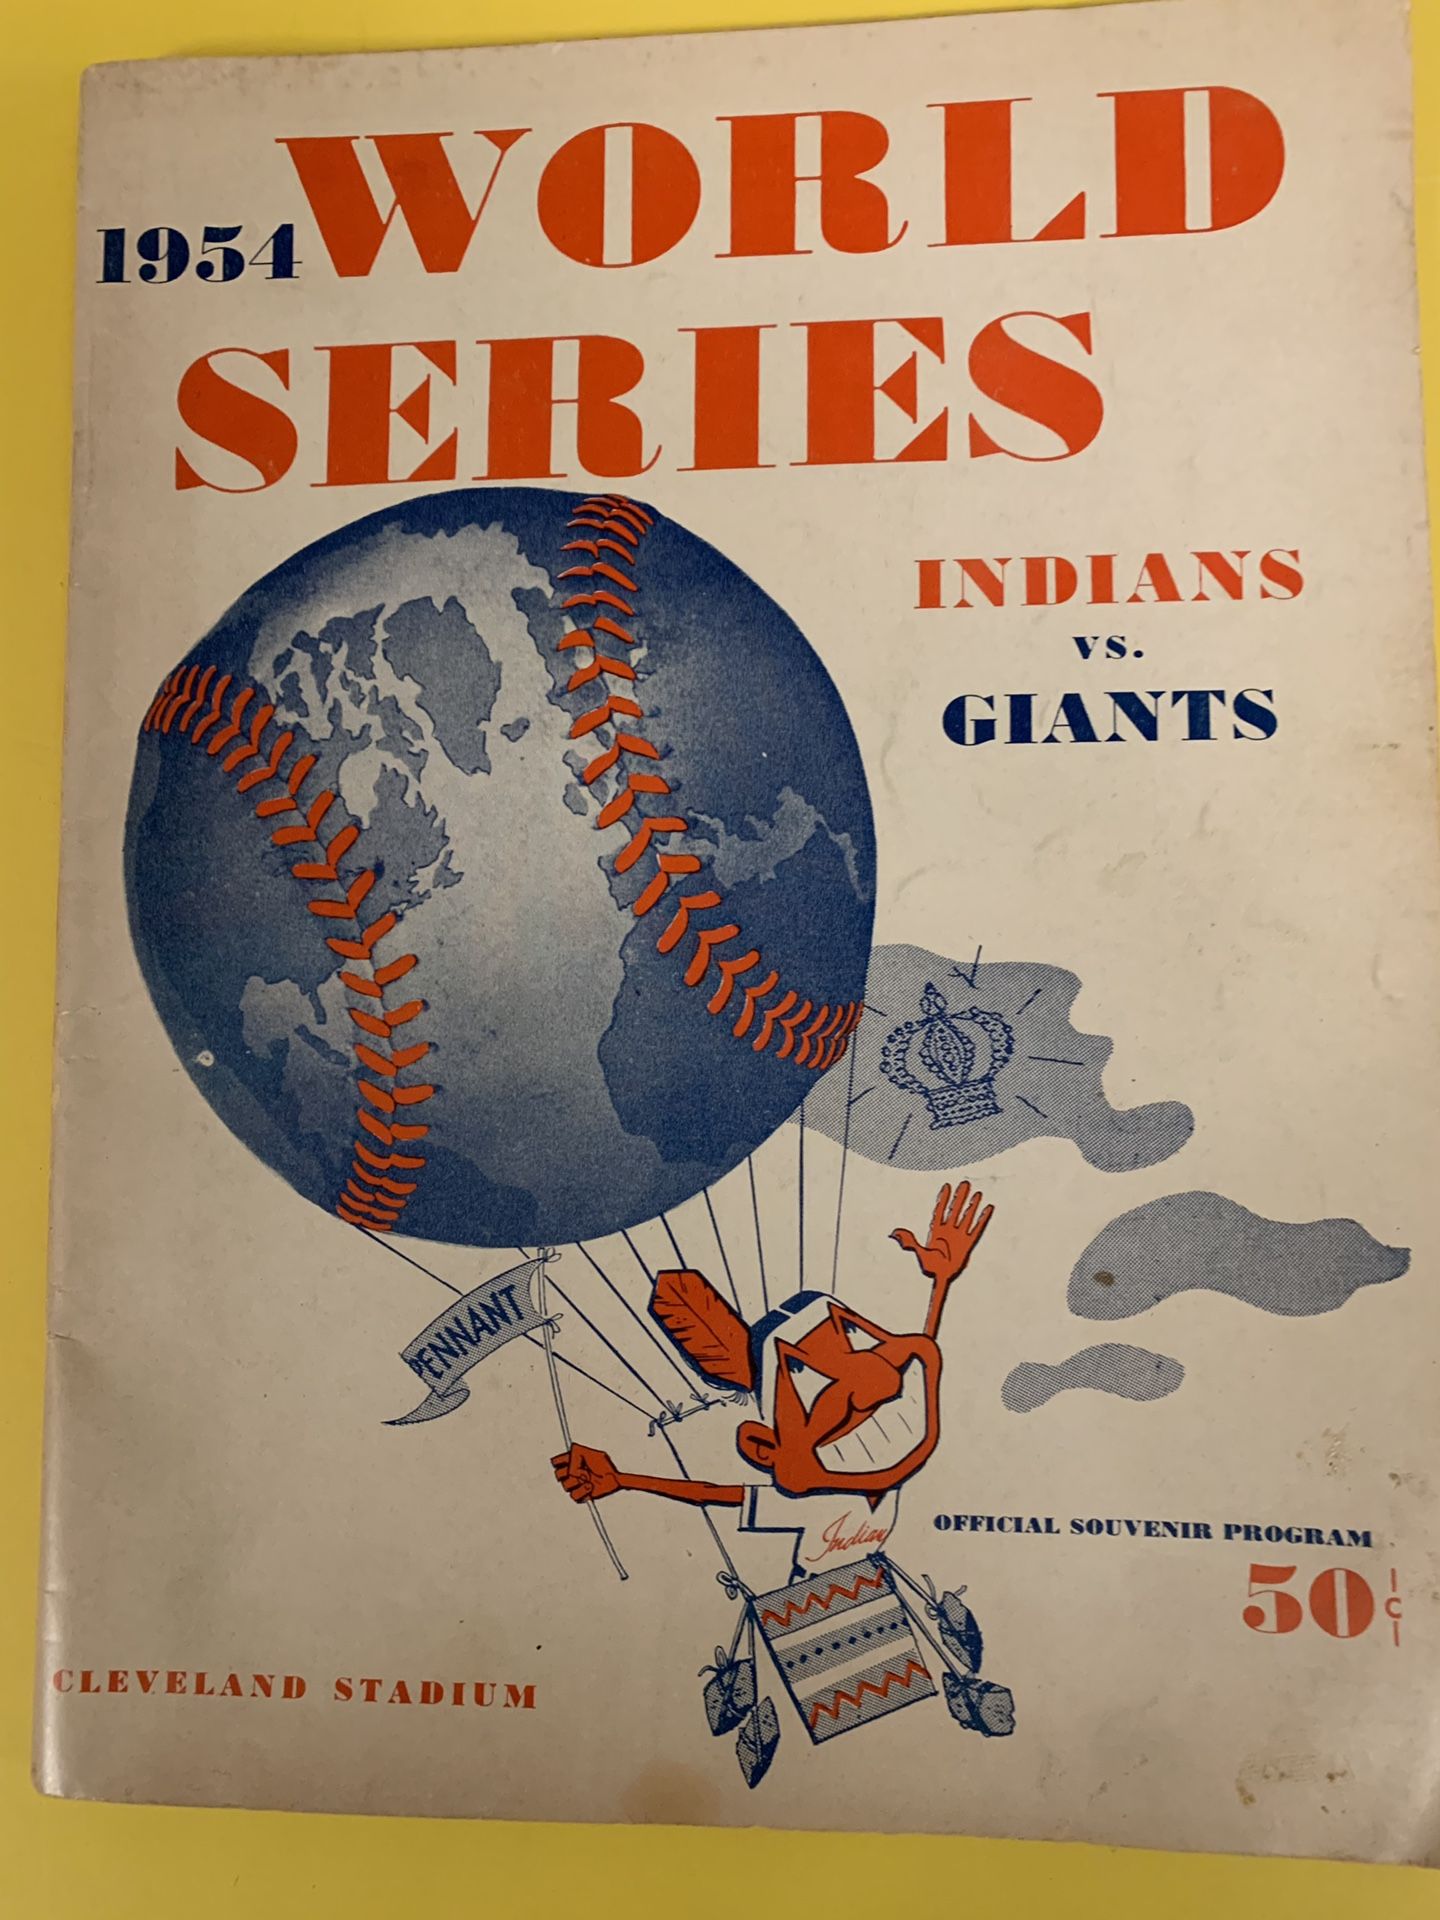 1954 CLEVELAND INDIANS VS NEW YORK GIANTS